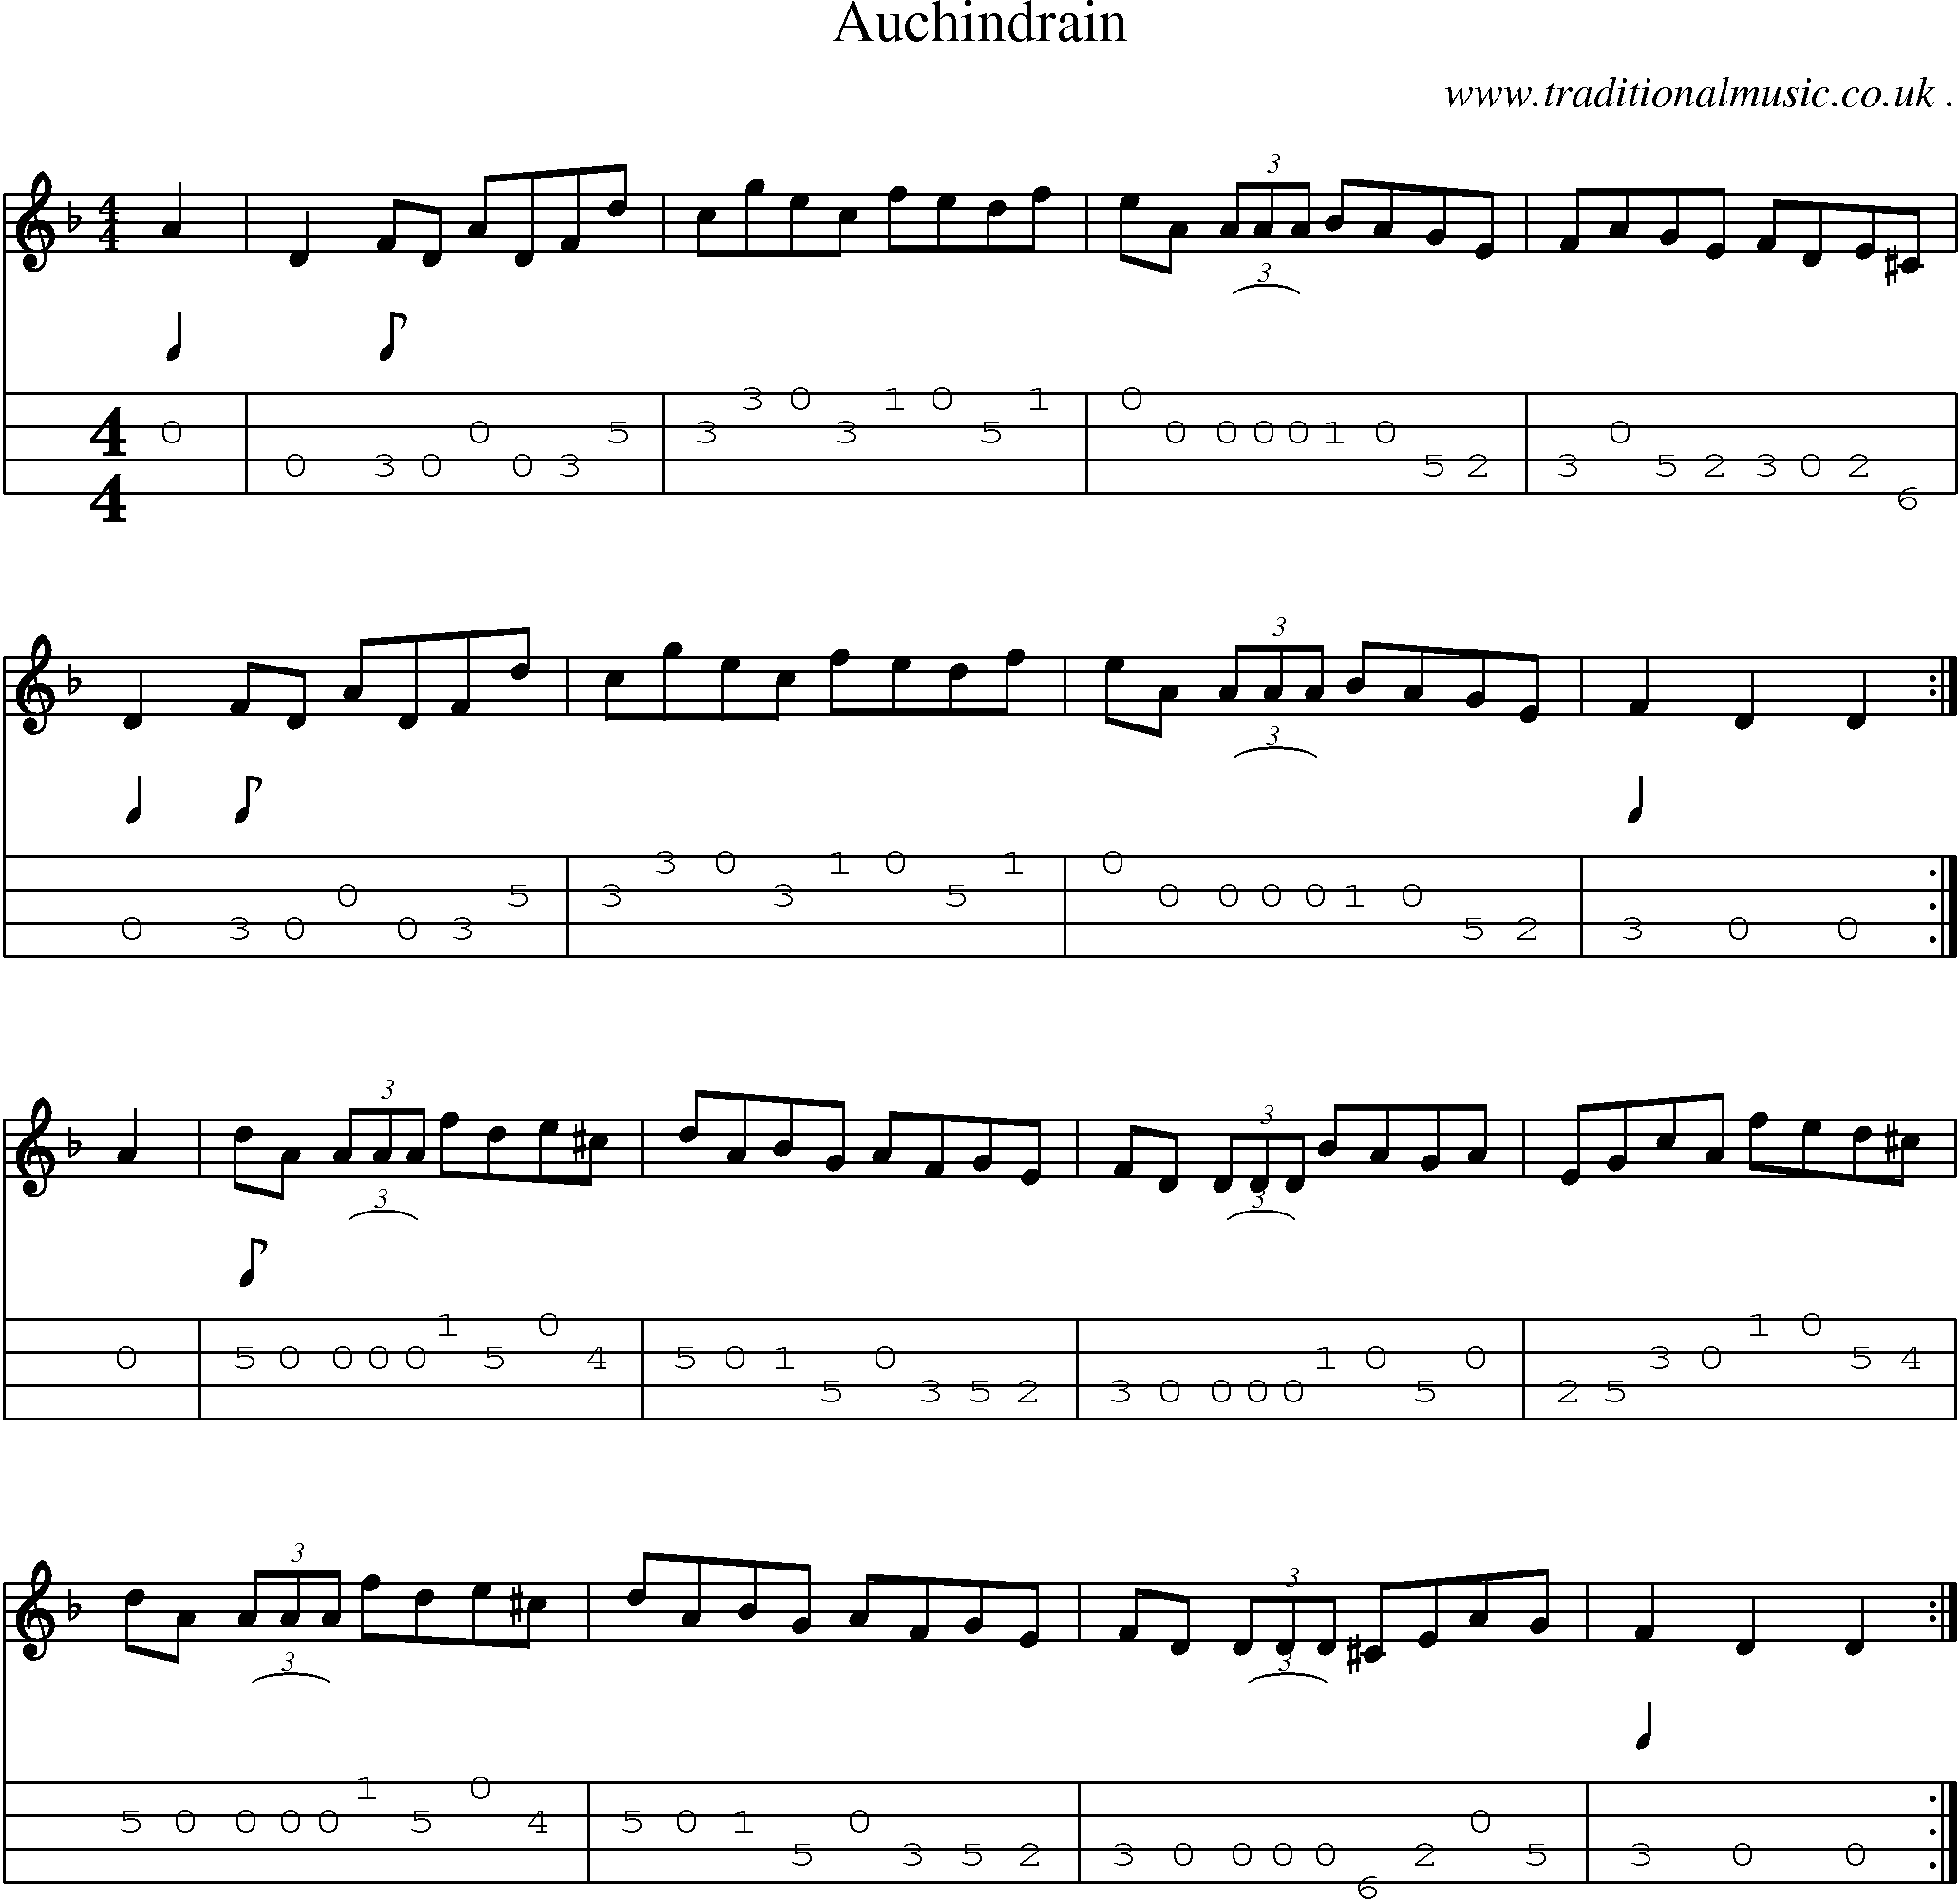 Sheet-music  score, Chords and Mandolin Tabs for Auchindrain